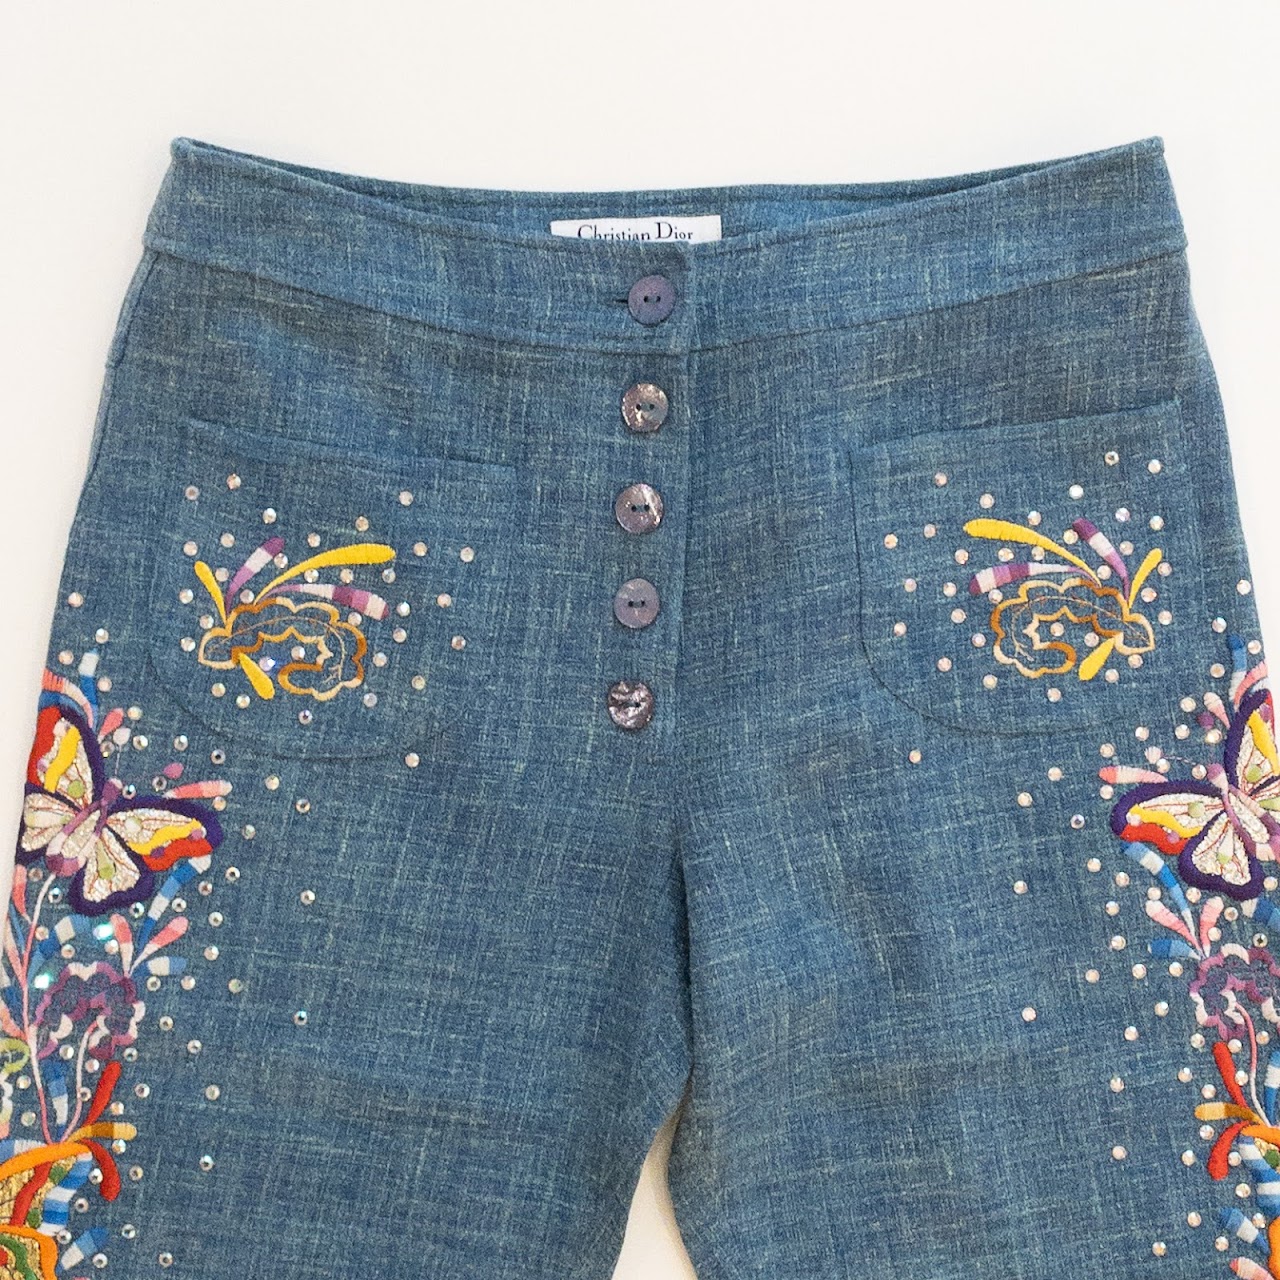 Christian Dior Embroidered Butterfly Rhinestone Pants